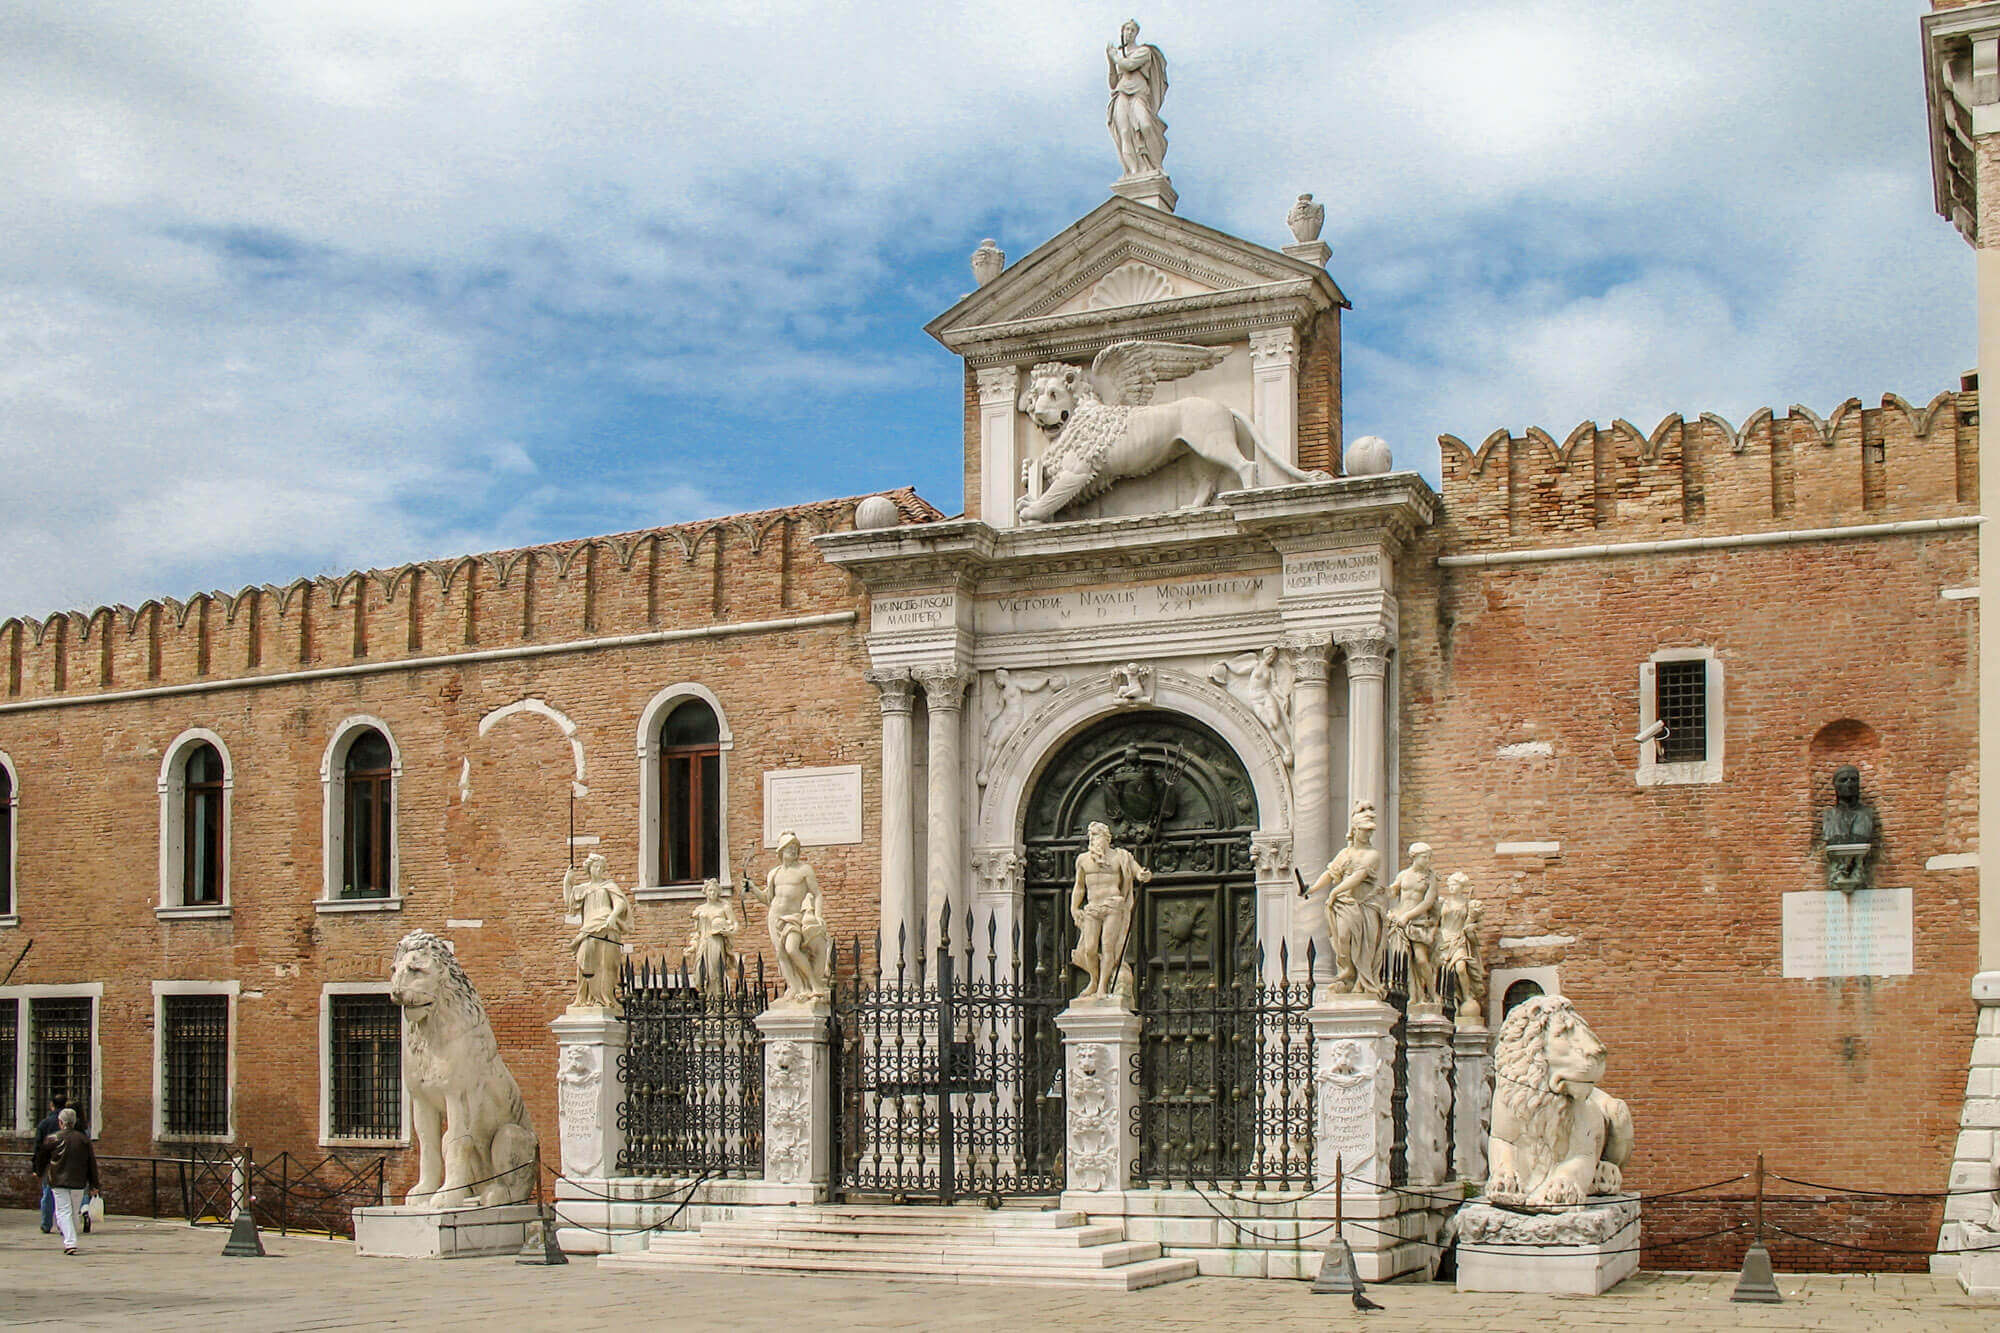 The main gate, Port Magna, of the Venetian Arsenal